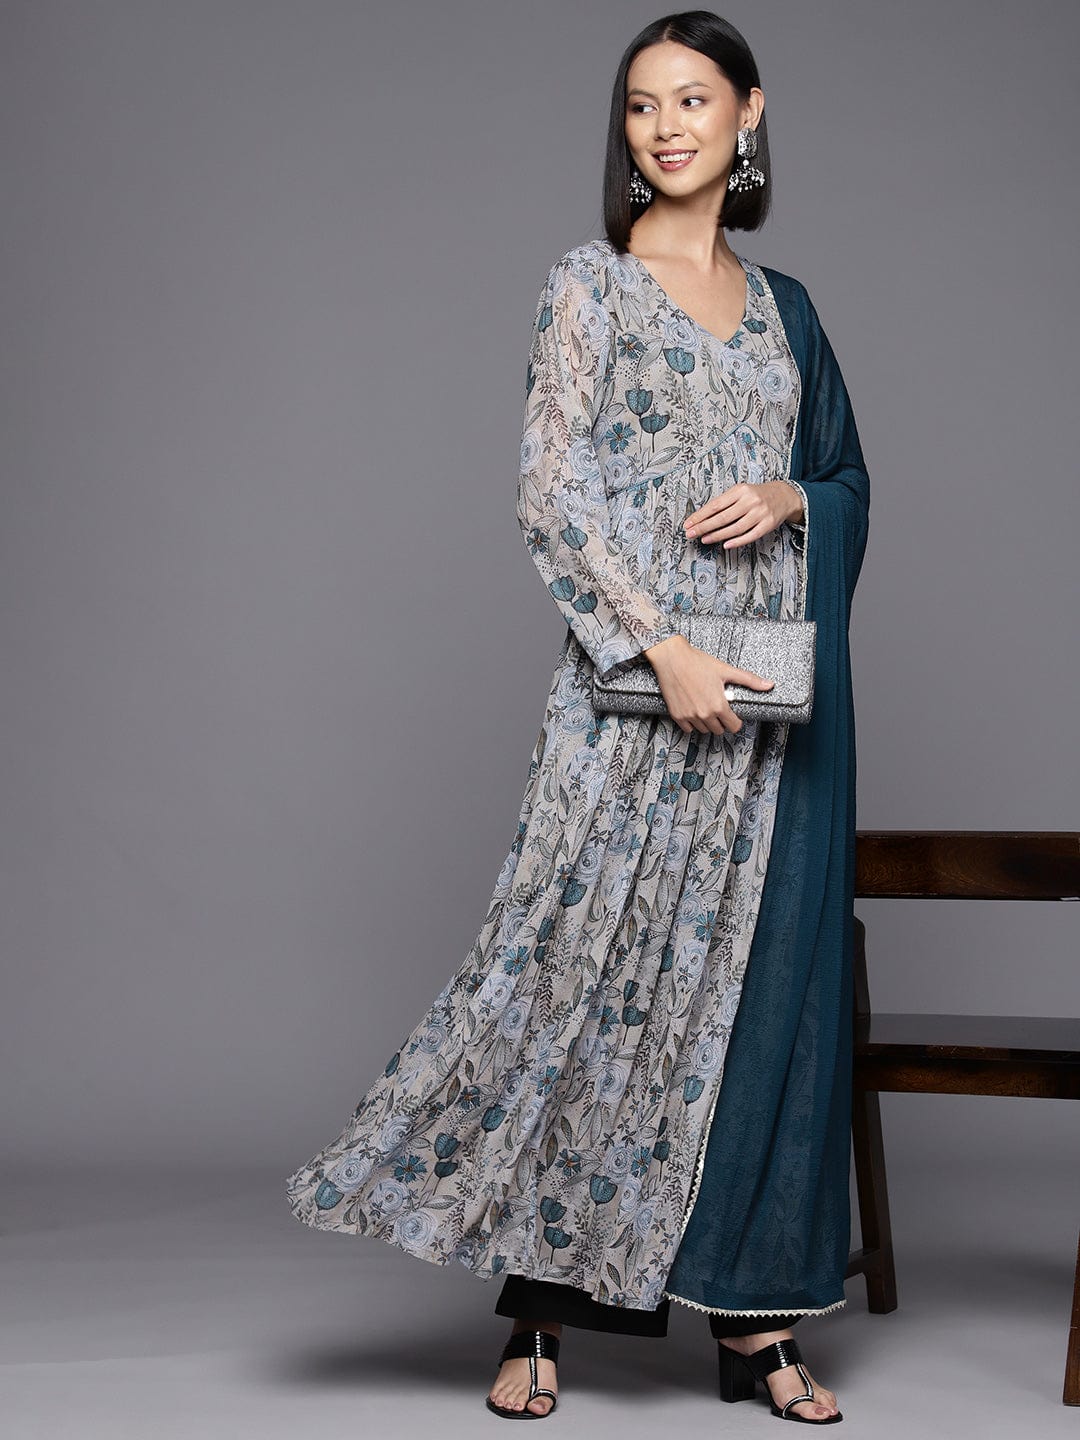 Grey Floral Printed Anarkali Kurta With Full Sleeves Paired With Green Solid Dupatta